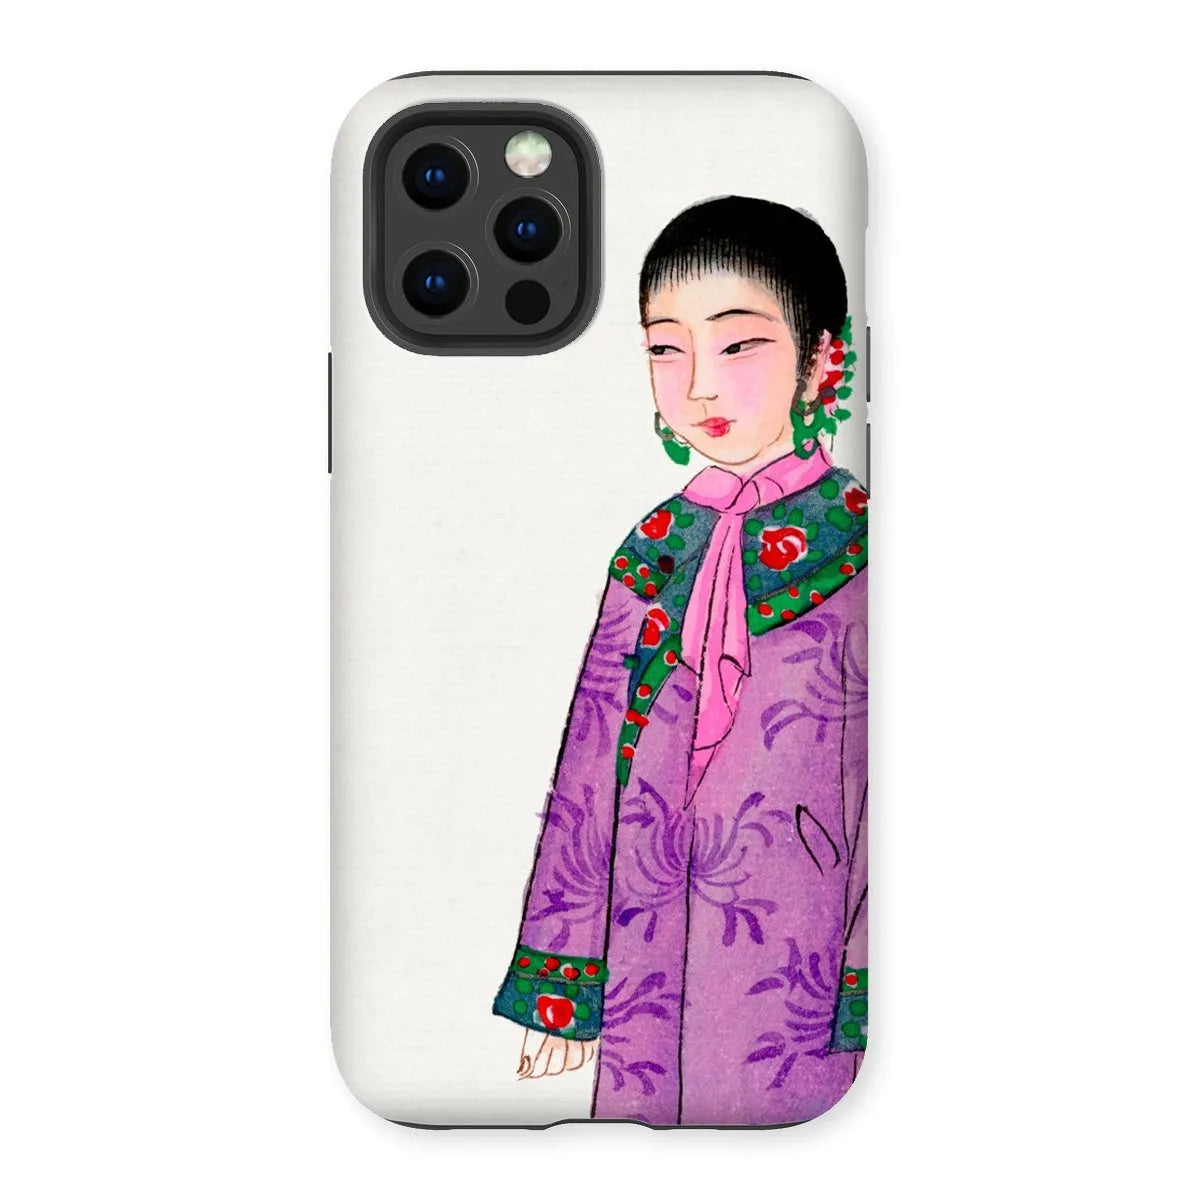 Manchu Noblewoman - Chinese Aesthetic Art Phone Case - Iphone 12 Pro / Matte - Mobile Phone Cases - Aesthetic Art